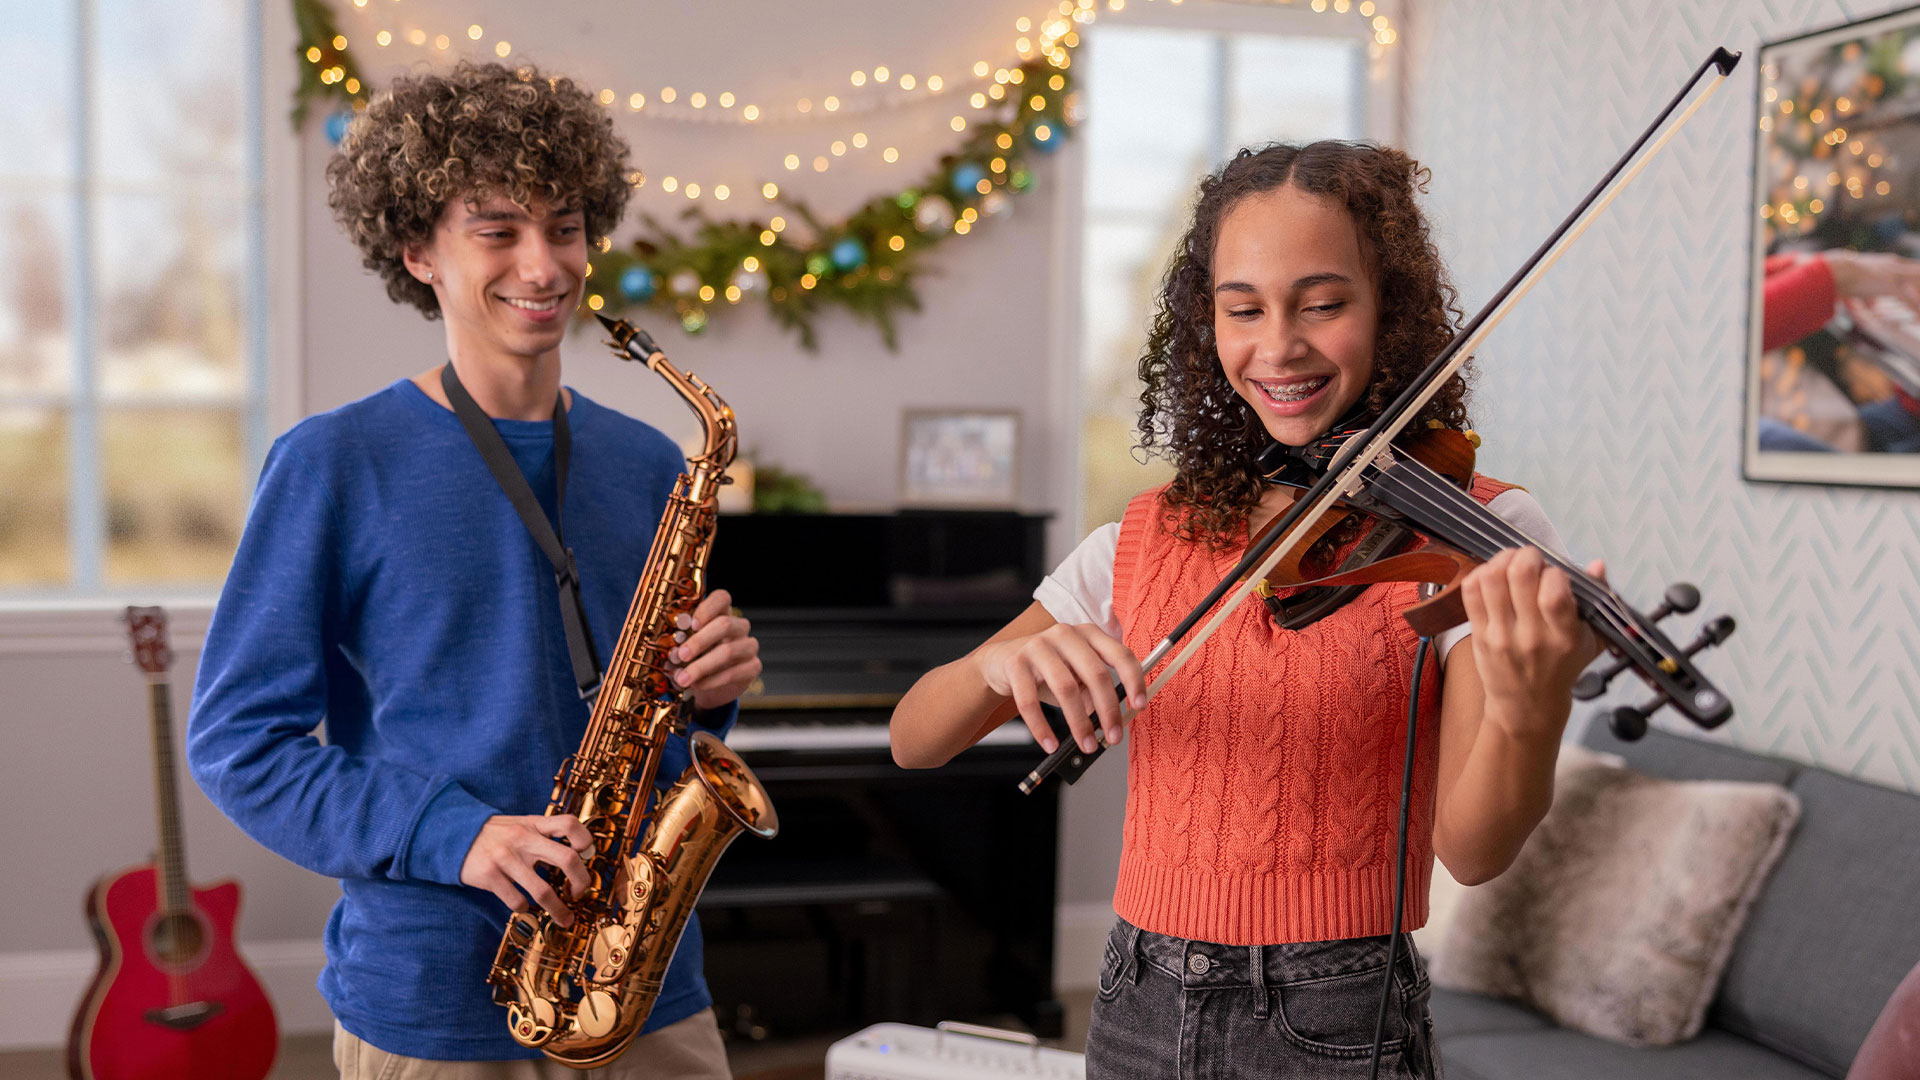 Teenager boy smiling holding the saxophone and girl smiling playing the violin